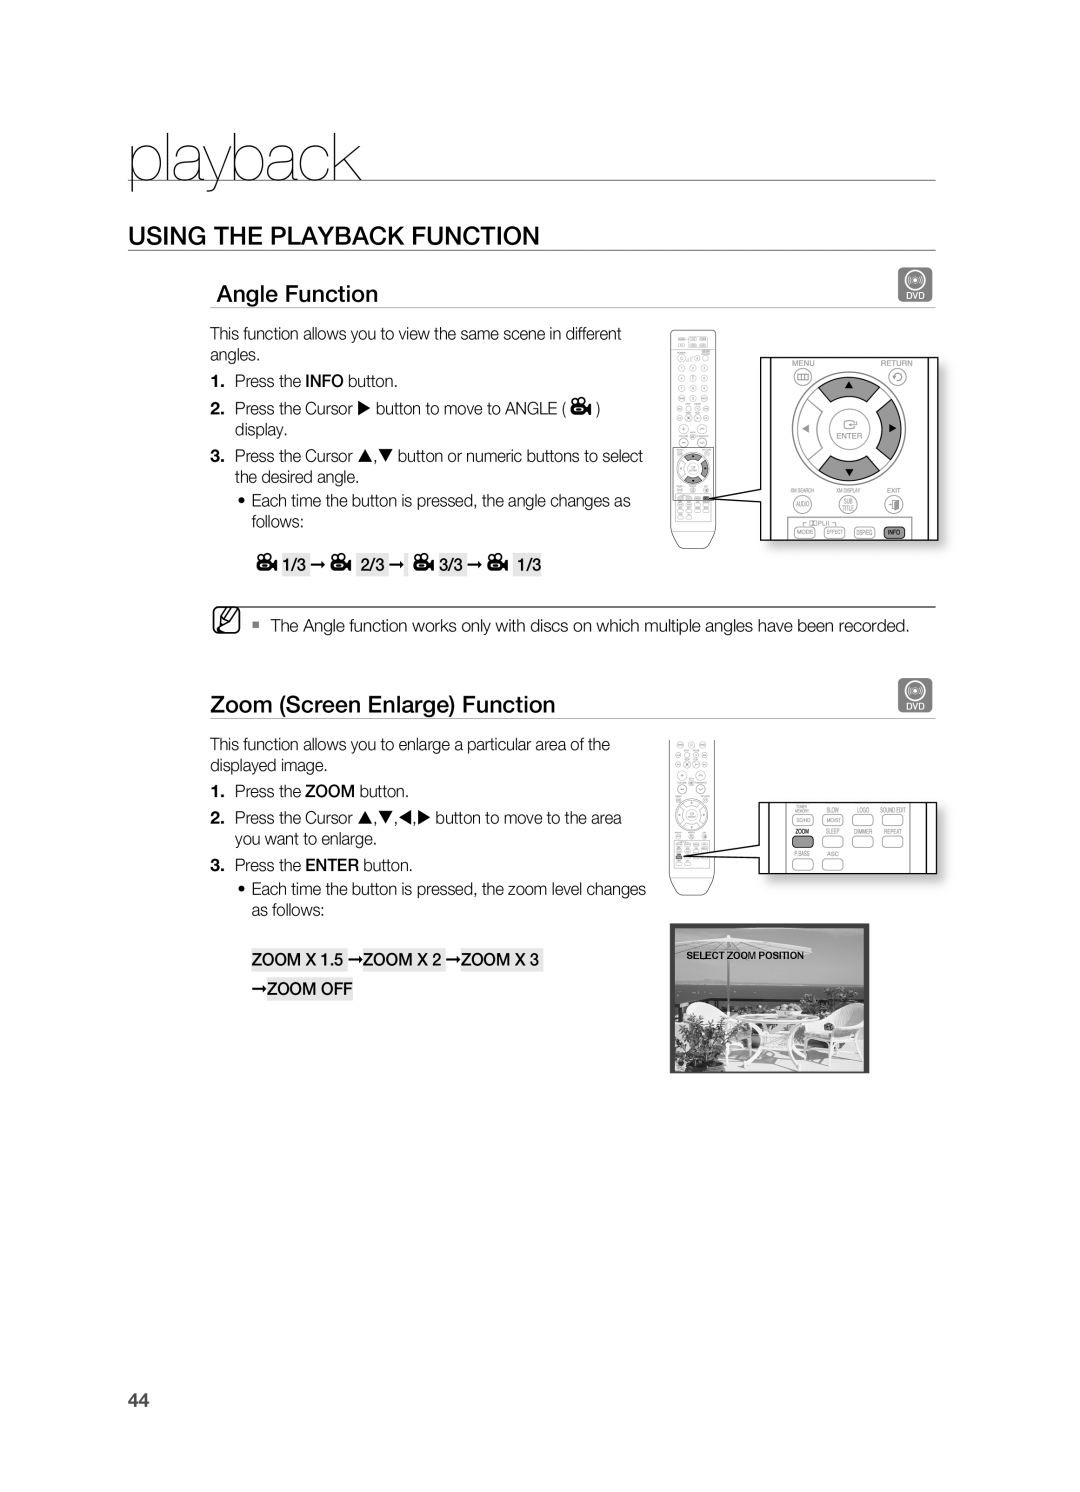 Samsung HT-Z510 manual playback, USINg THE PLAYBACK FUNCTION, Angle Function, Zoom Screen Enlarge Function 